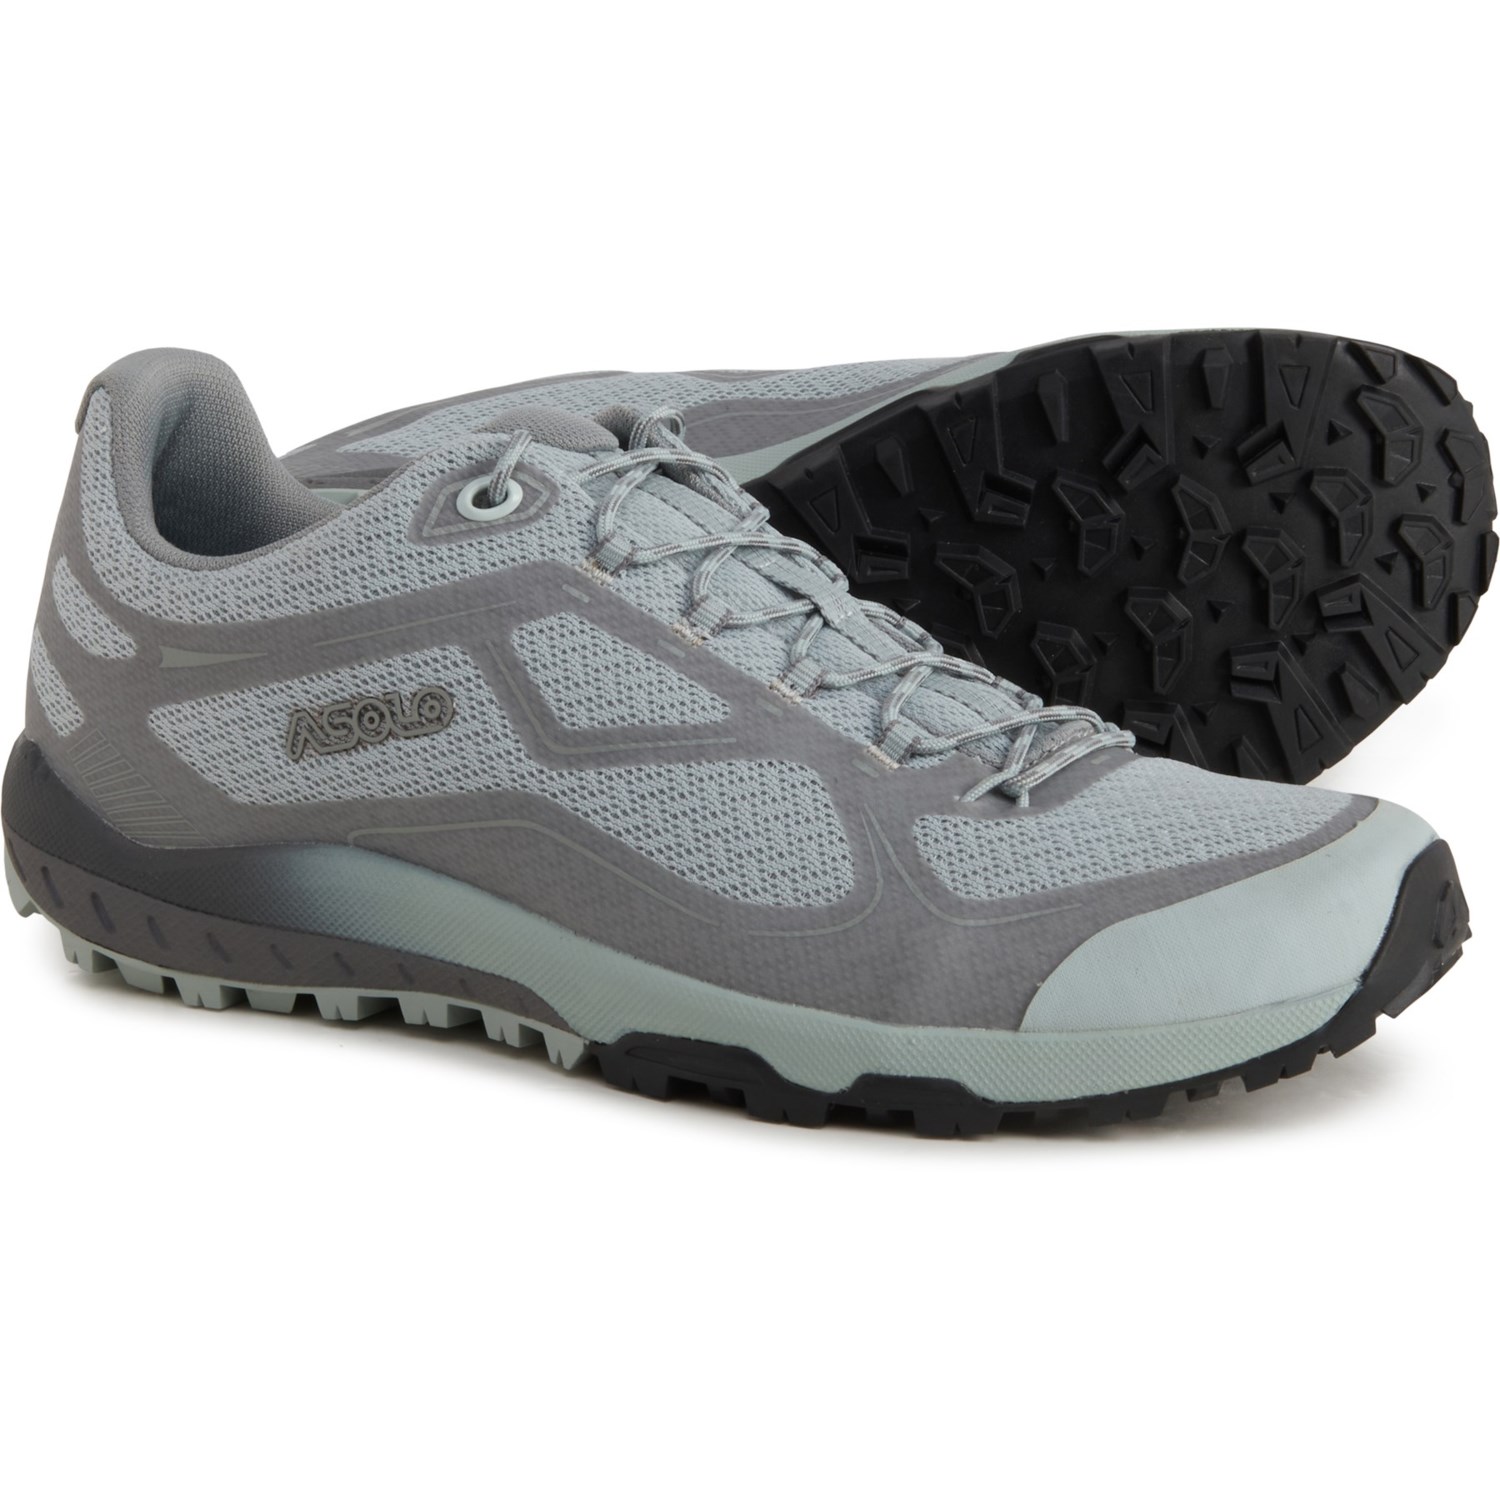 Asolo Flyer Hiking Shoes (For Women)